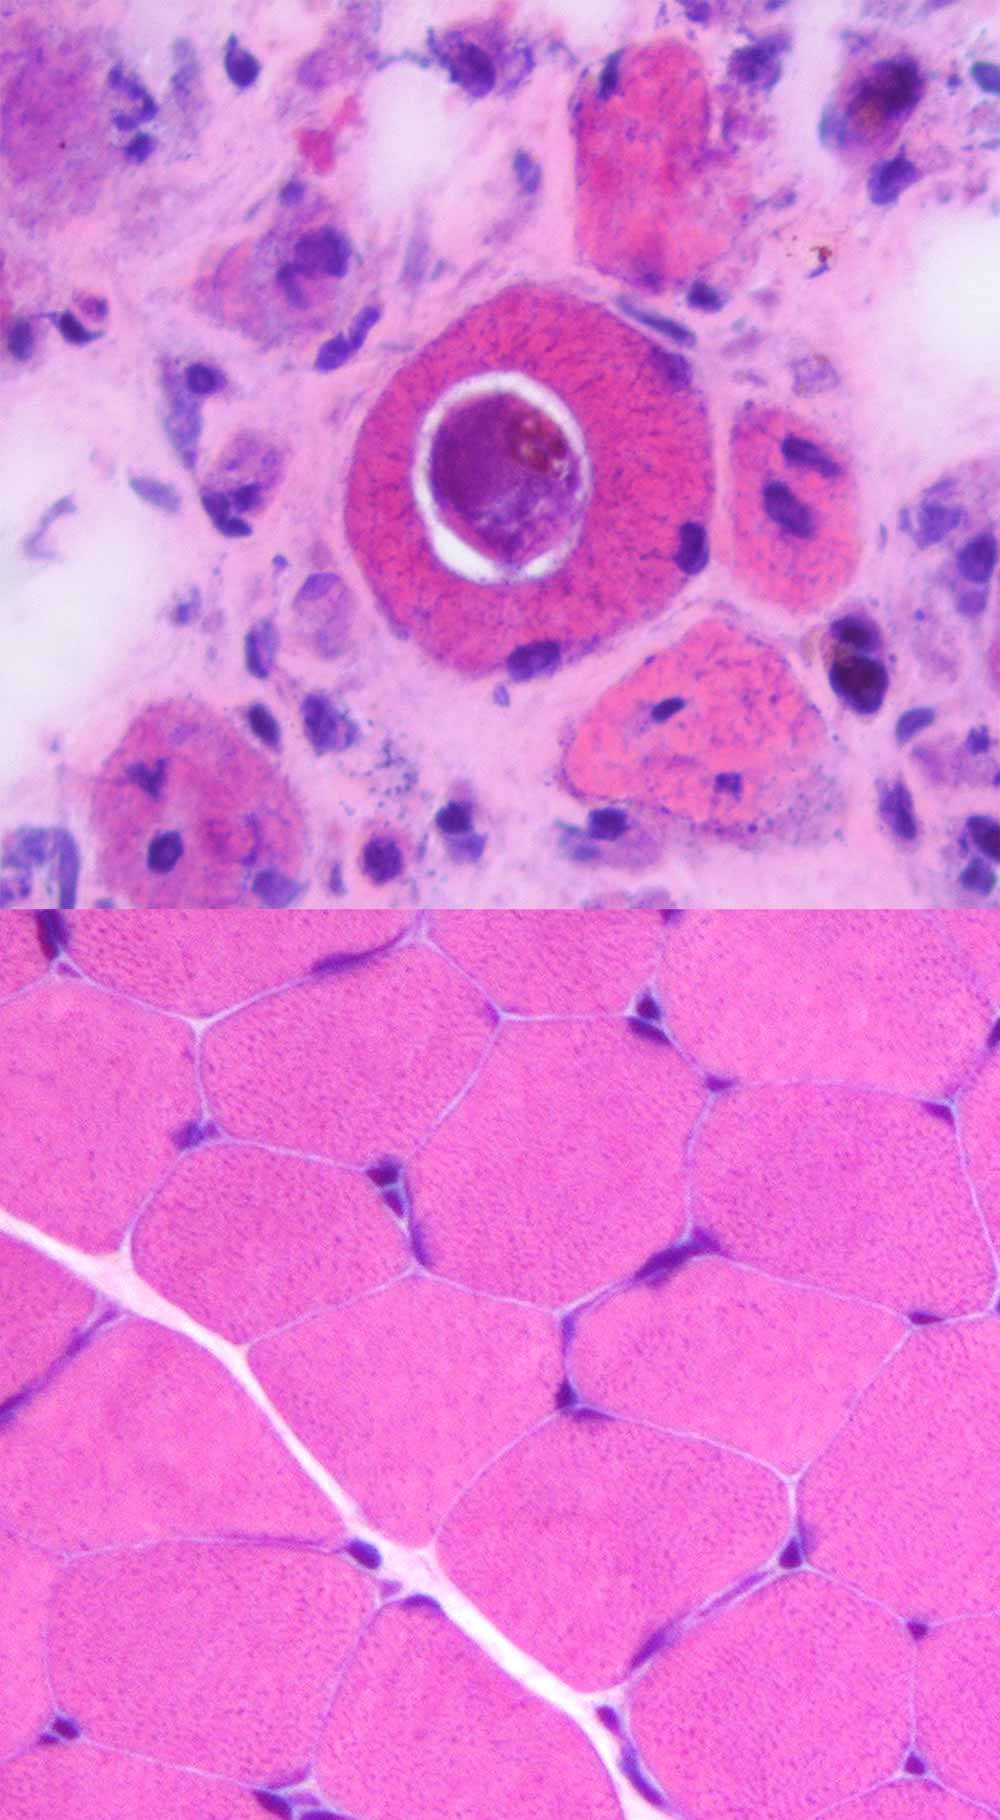 Cross-section of muscle fibre illustrating H. perplexum (dark purple) in individual muscle cells